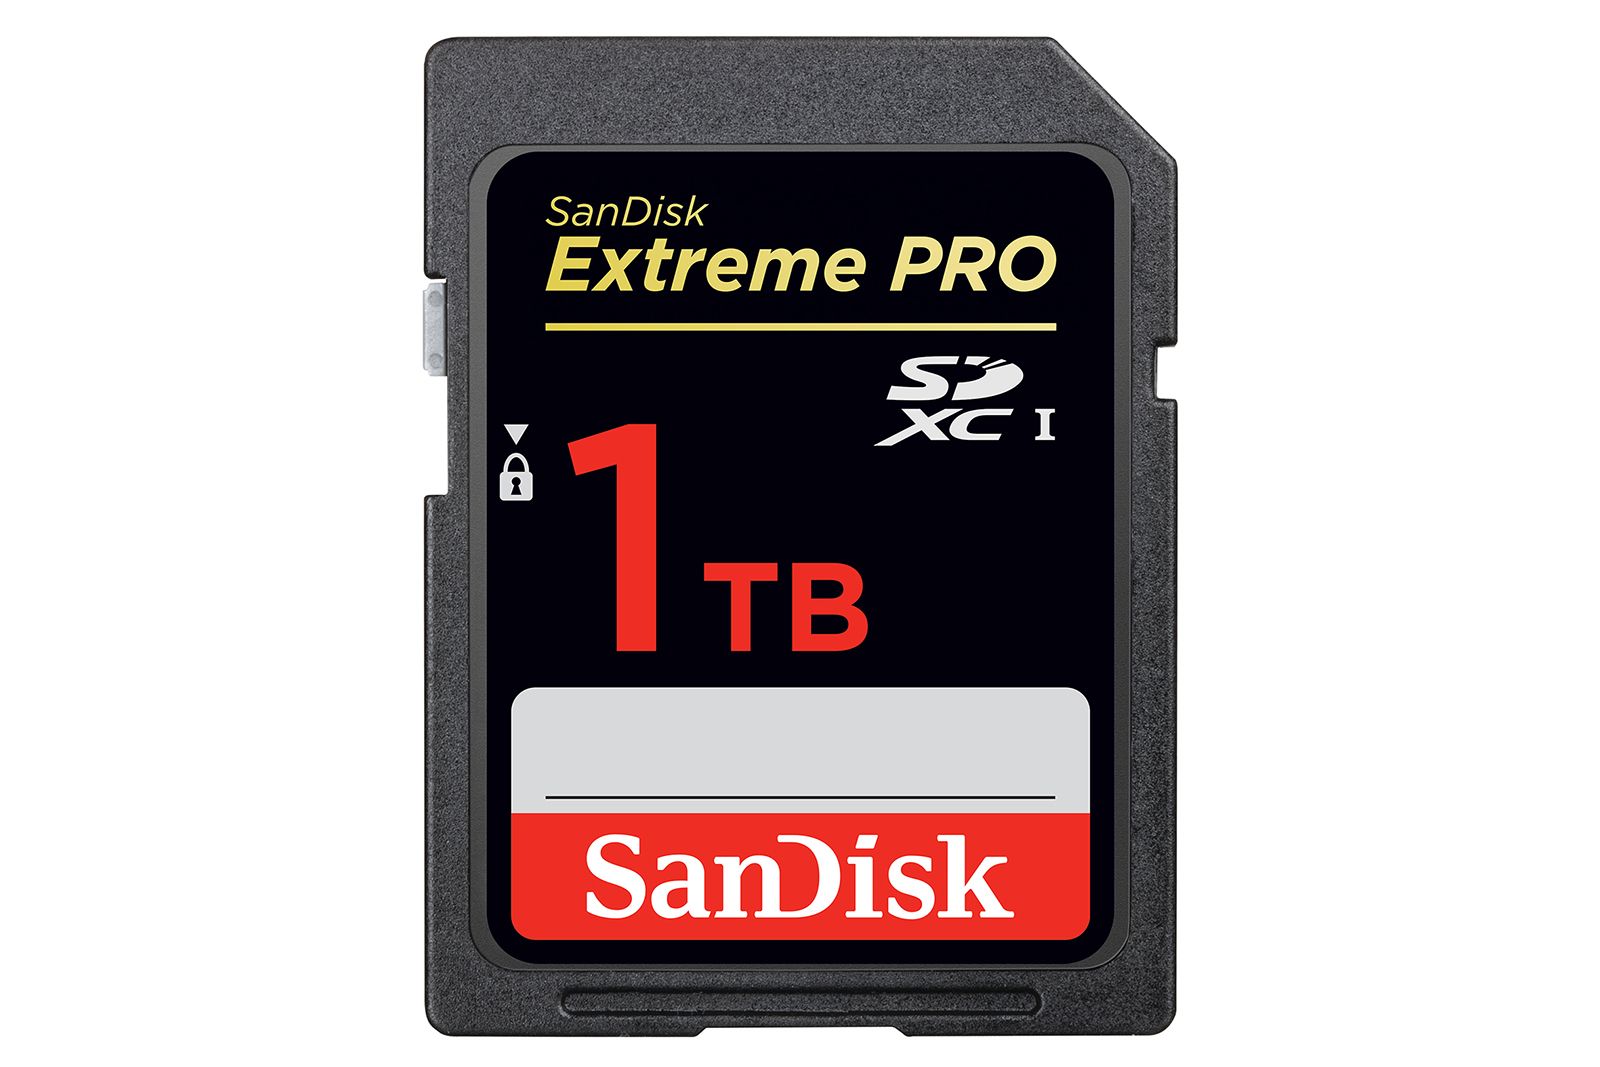 you can fit more than 26 000 raw files on this one 1tb sandisk sd card image 1